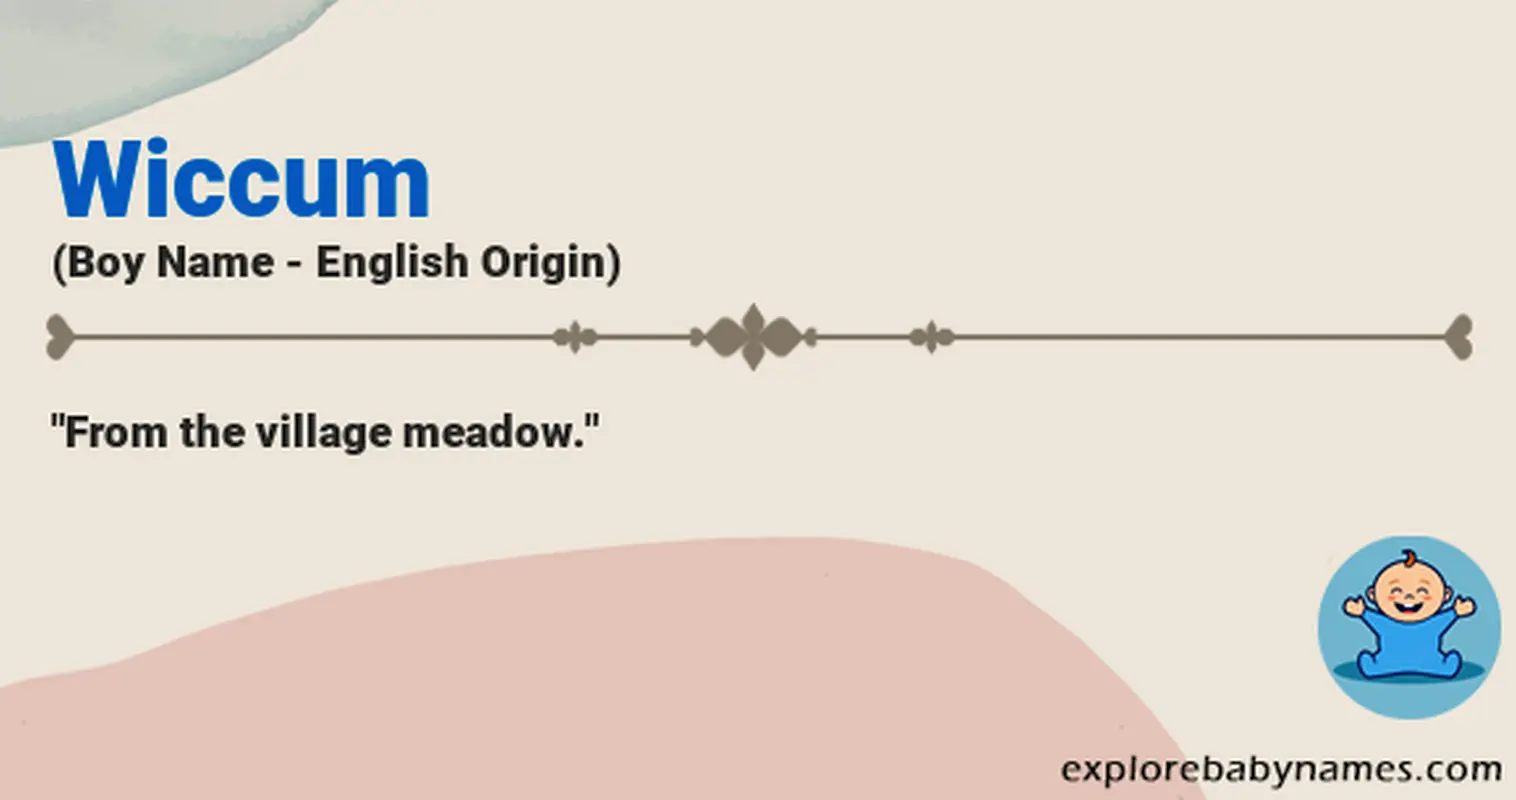 Meaning of Wiccum